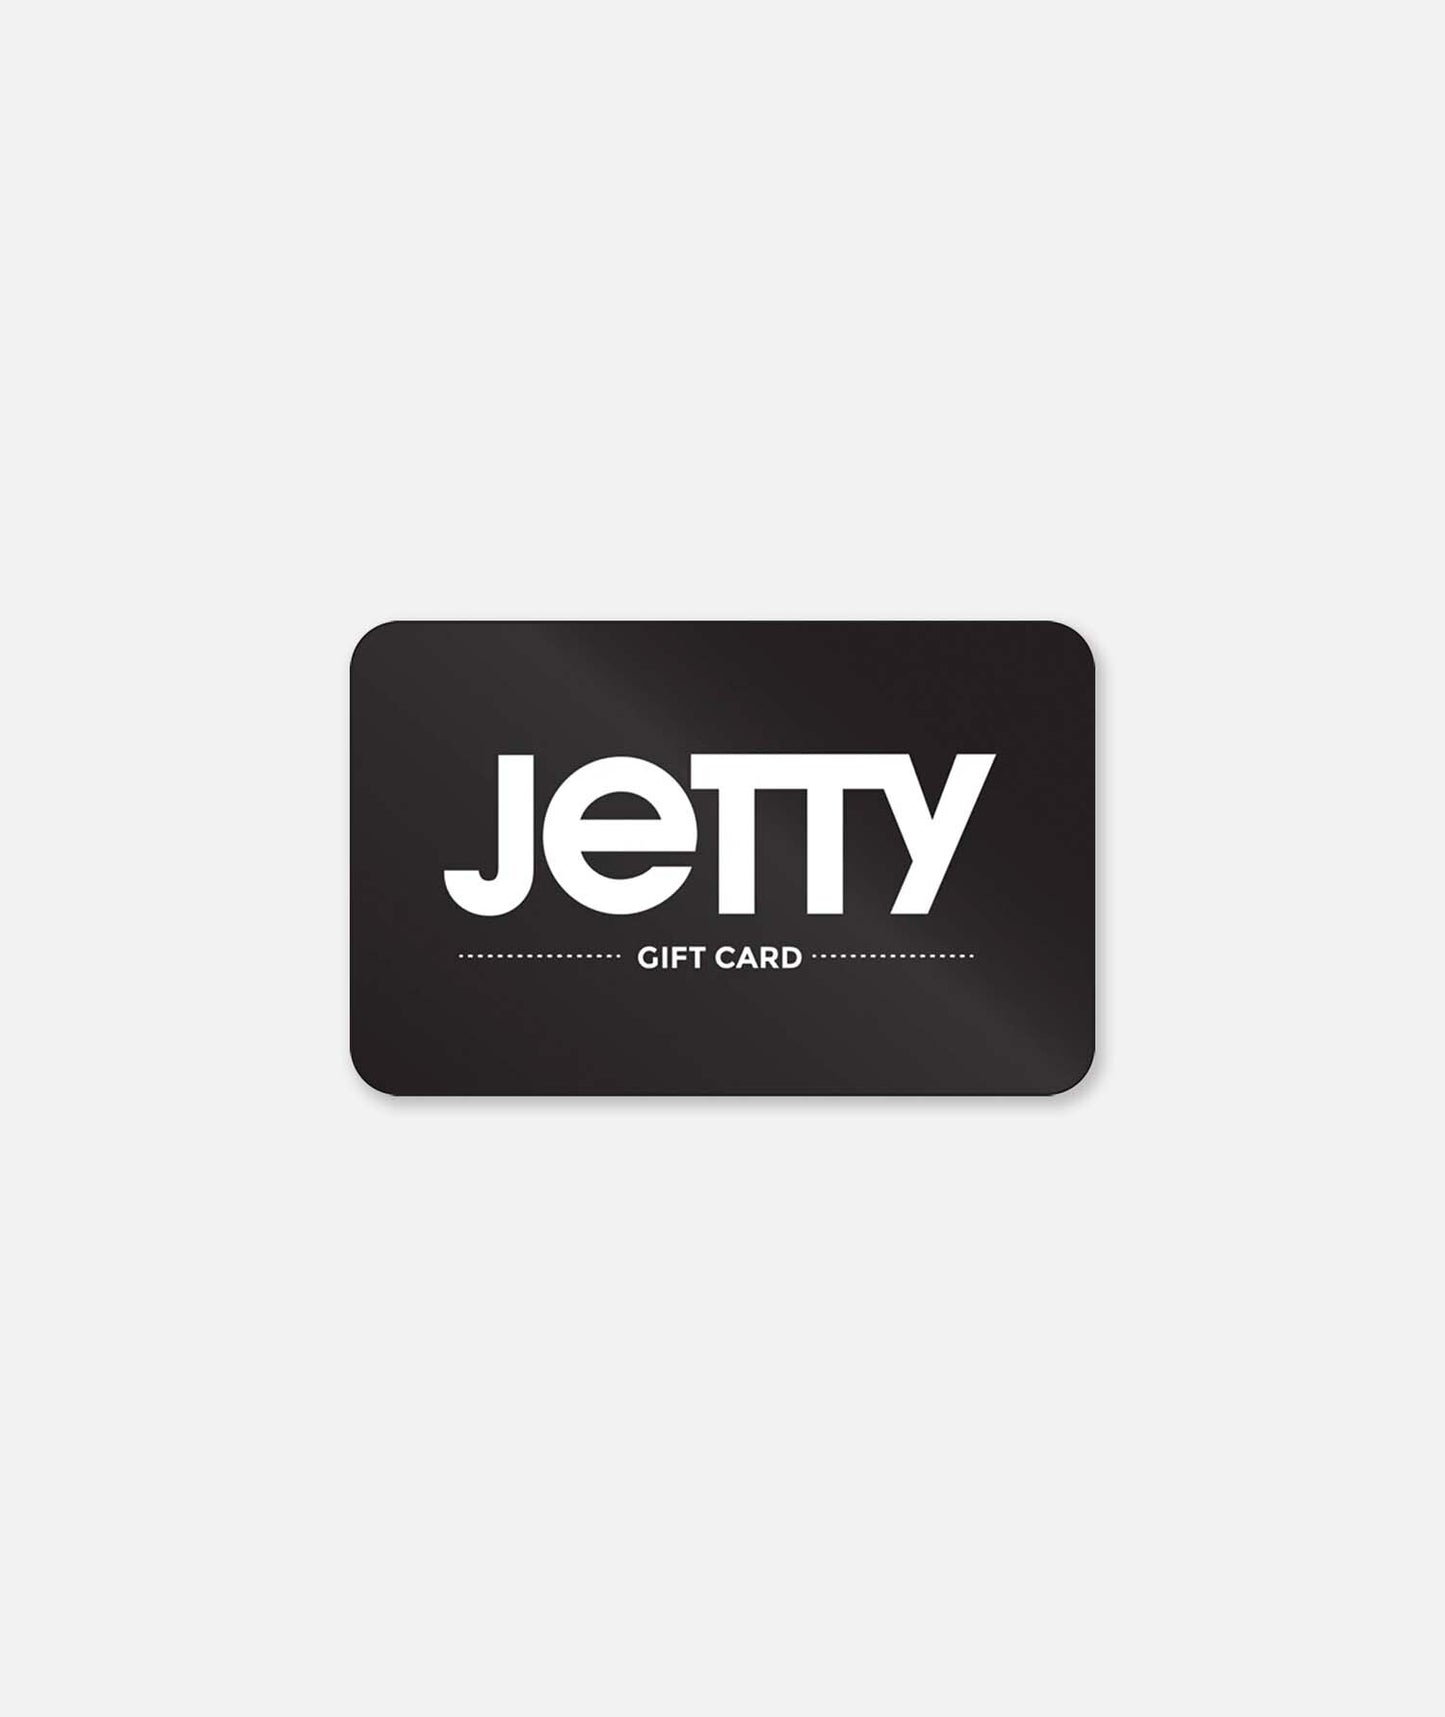 Jetty Physical Gift Card $25